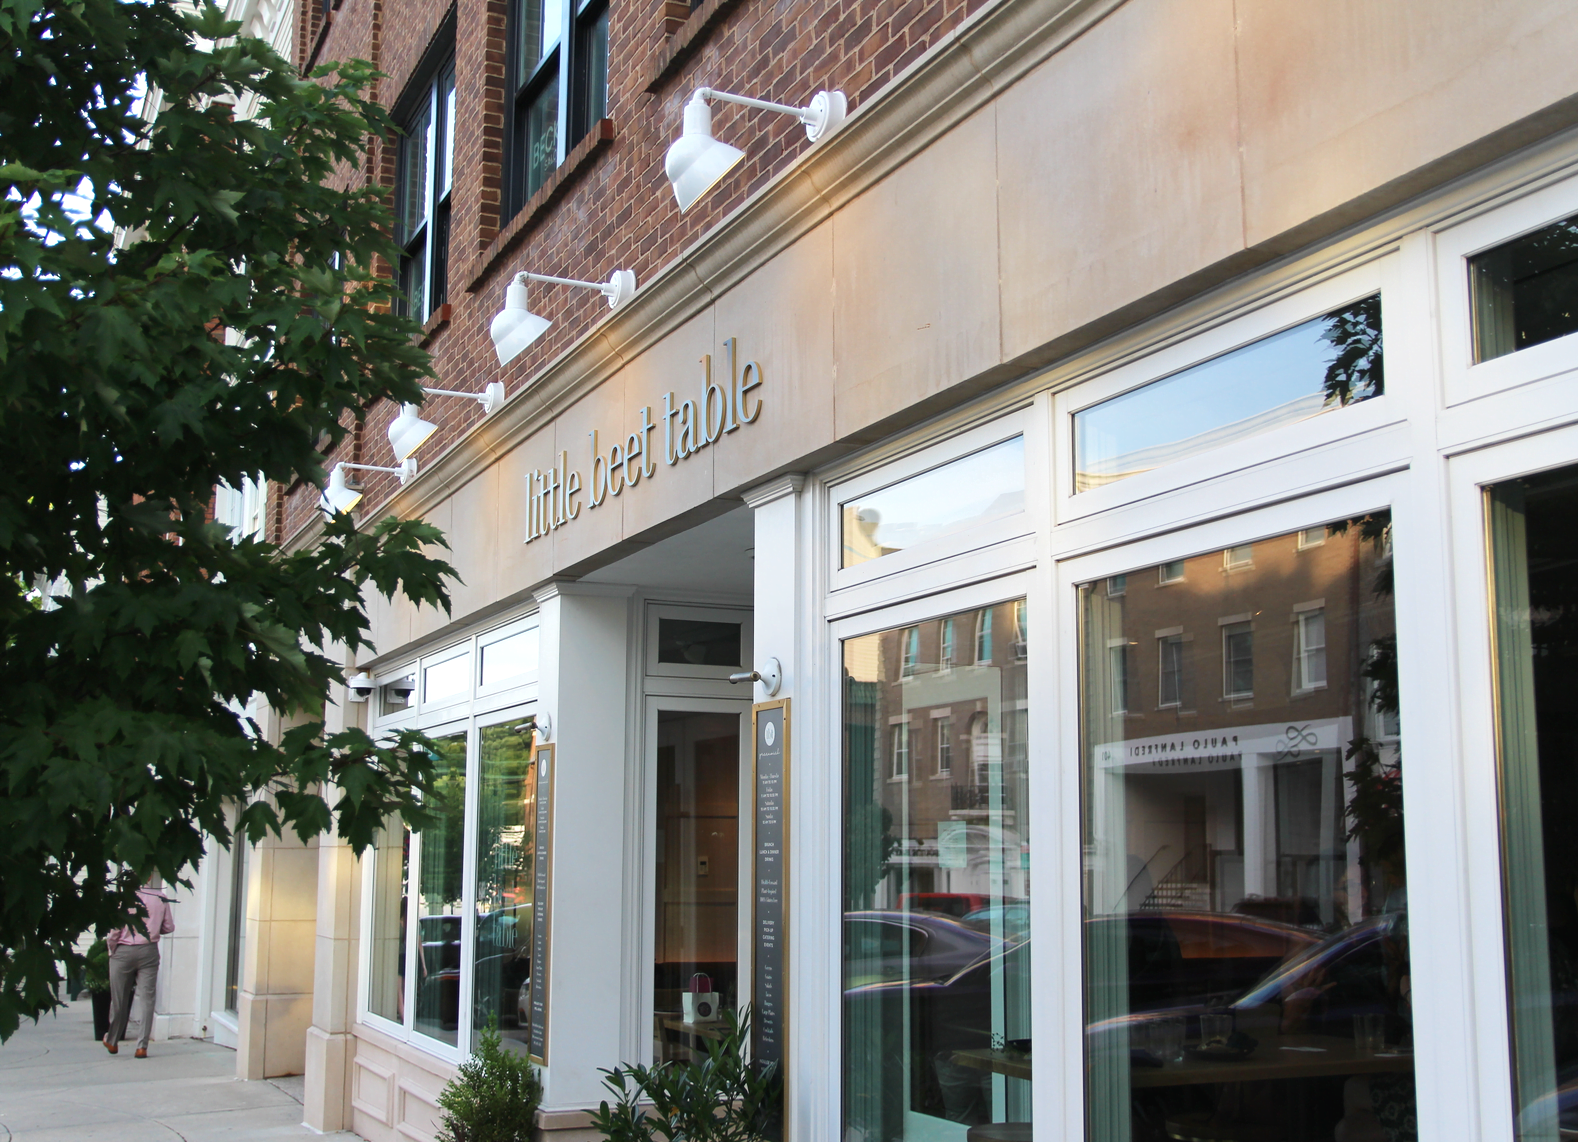 Little Beet Table is located at 376 Greenwich Ave. Tel. (203) 405-5787